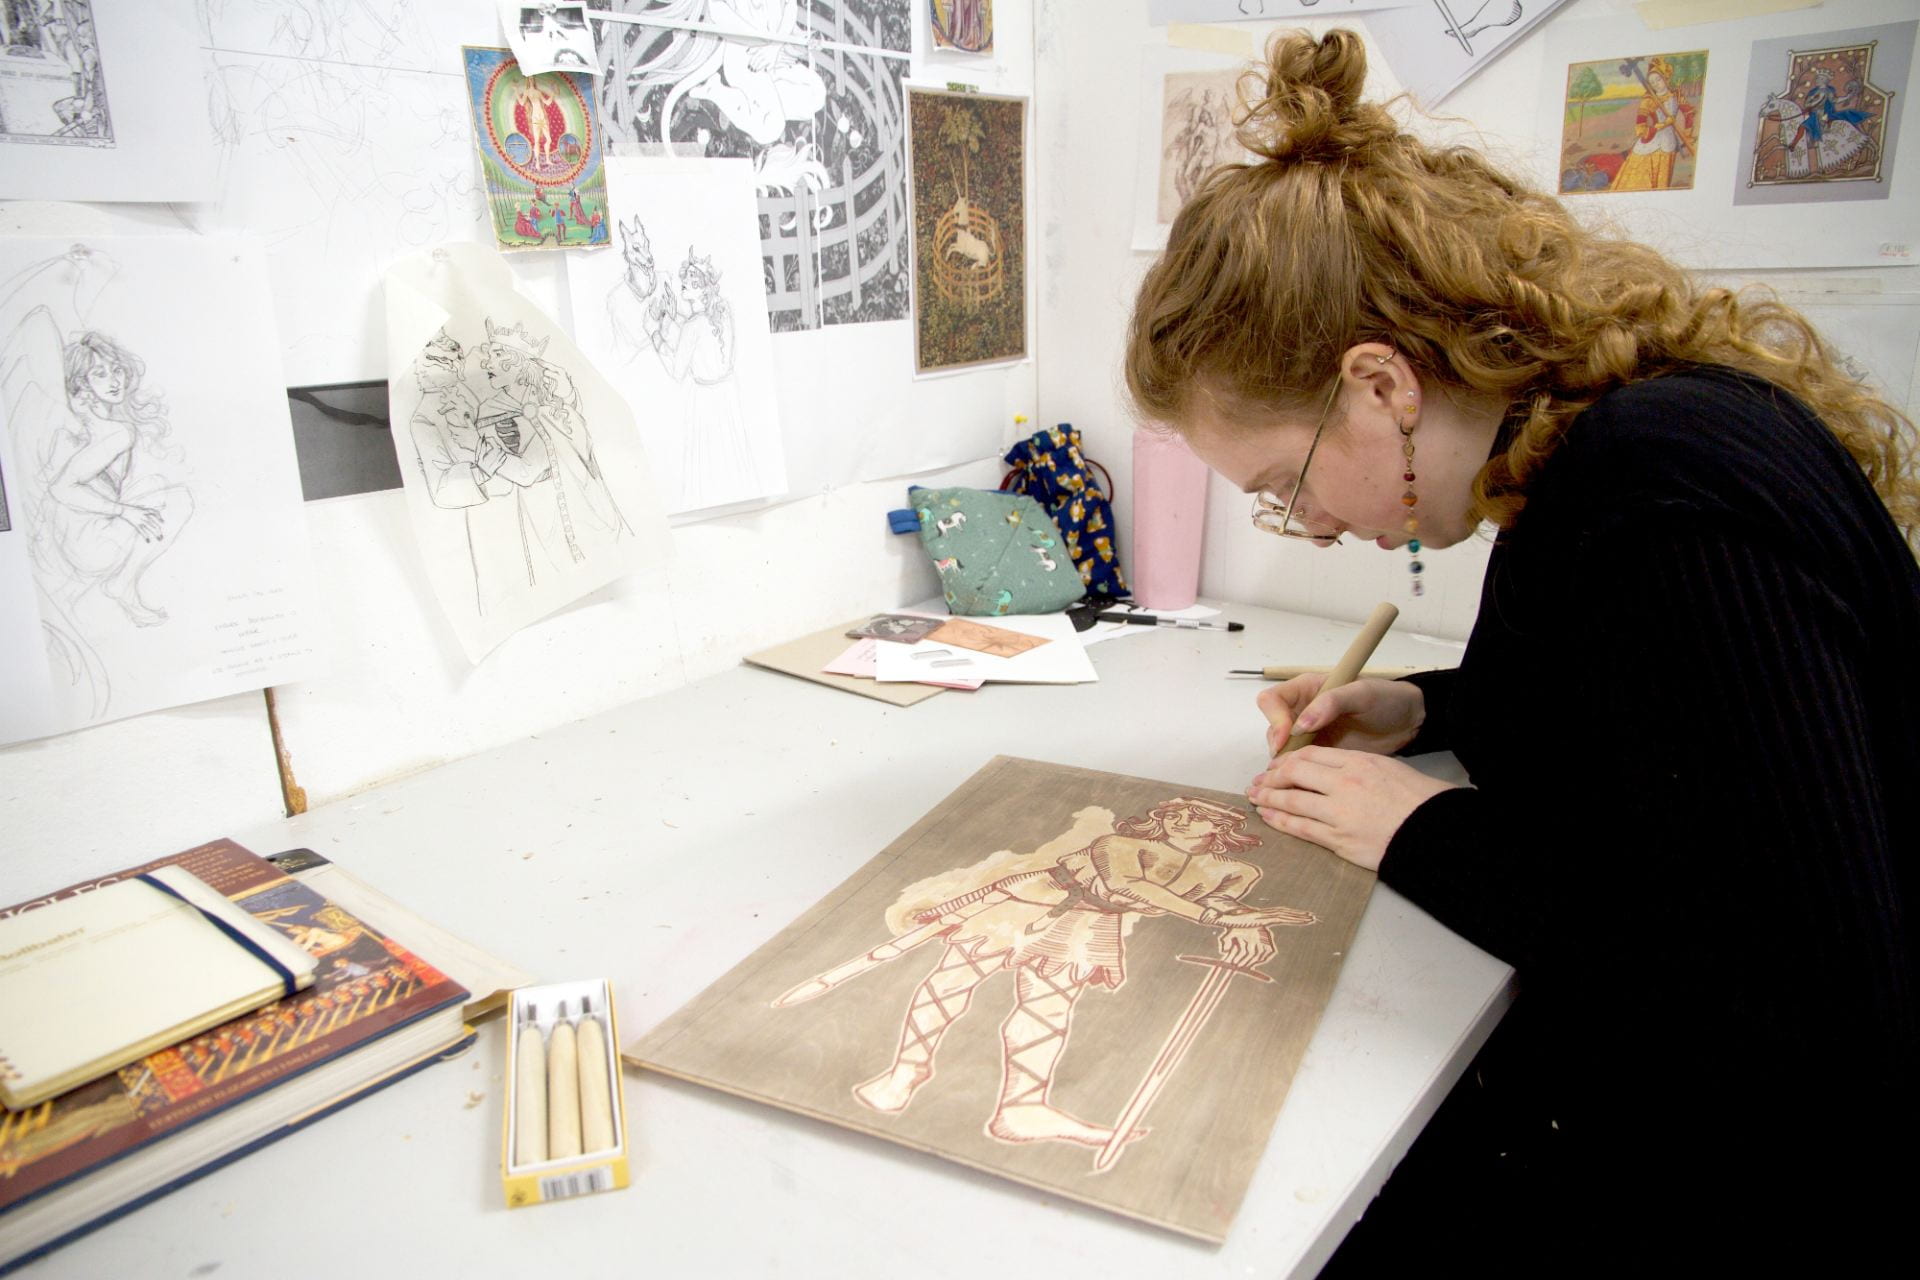 artist sat at desk working on woodcut, wall behind is covered in images.